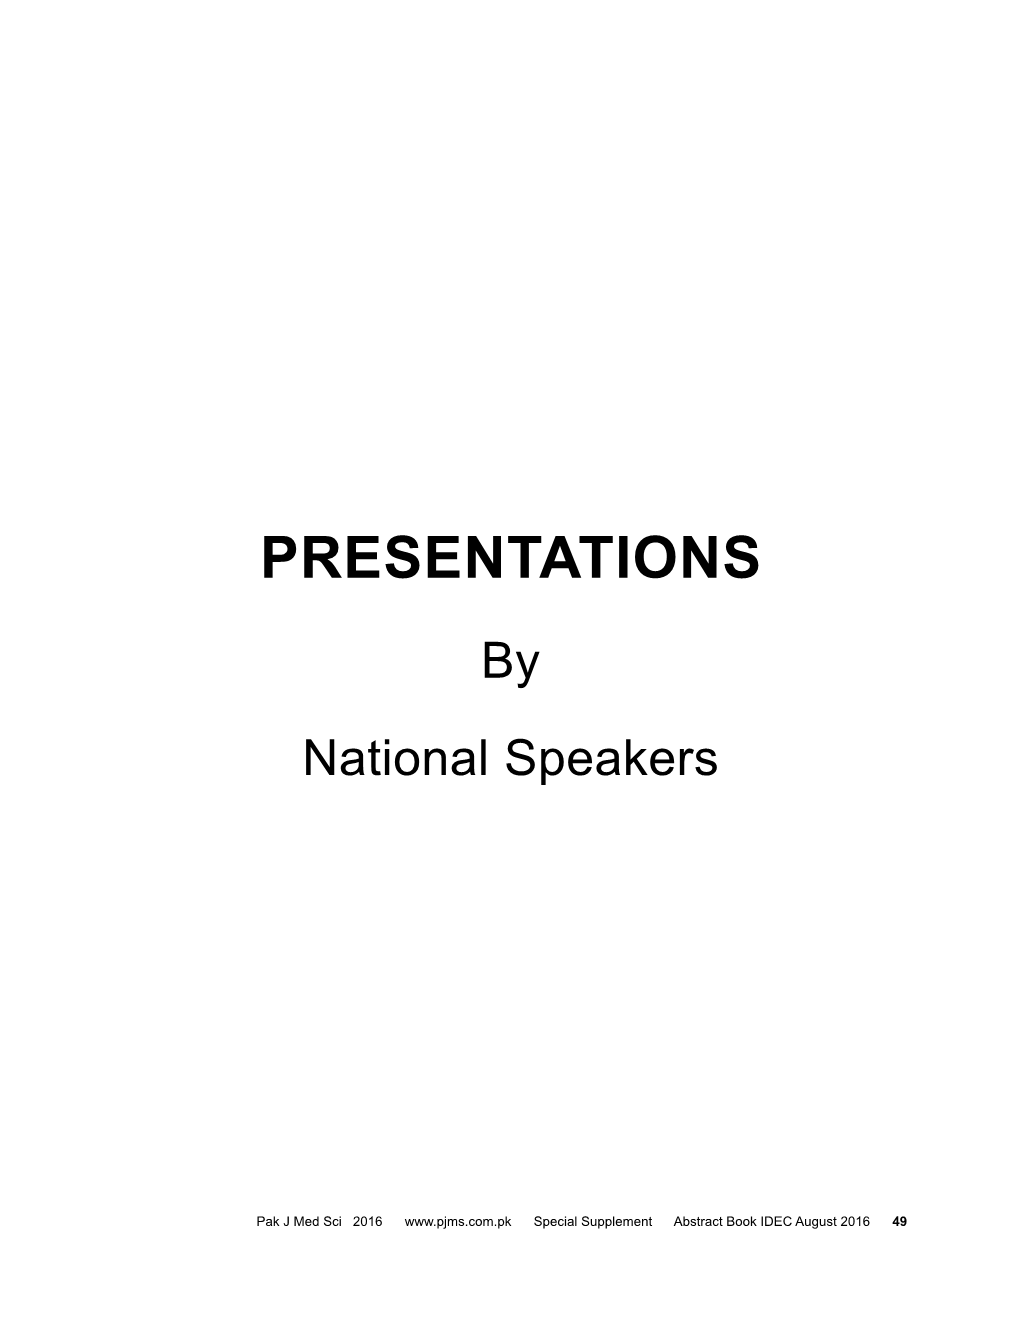 Presentations by National Speakers